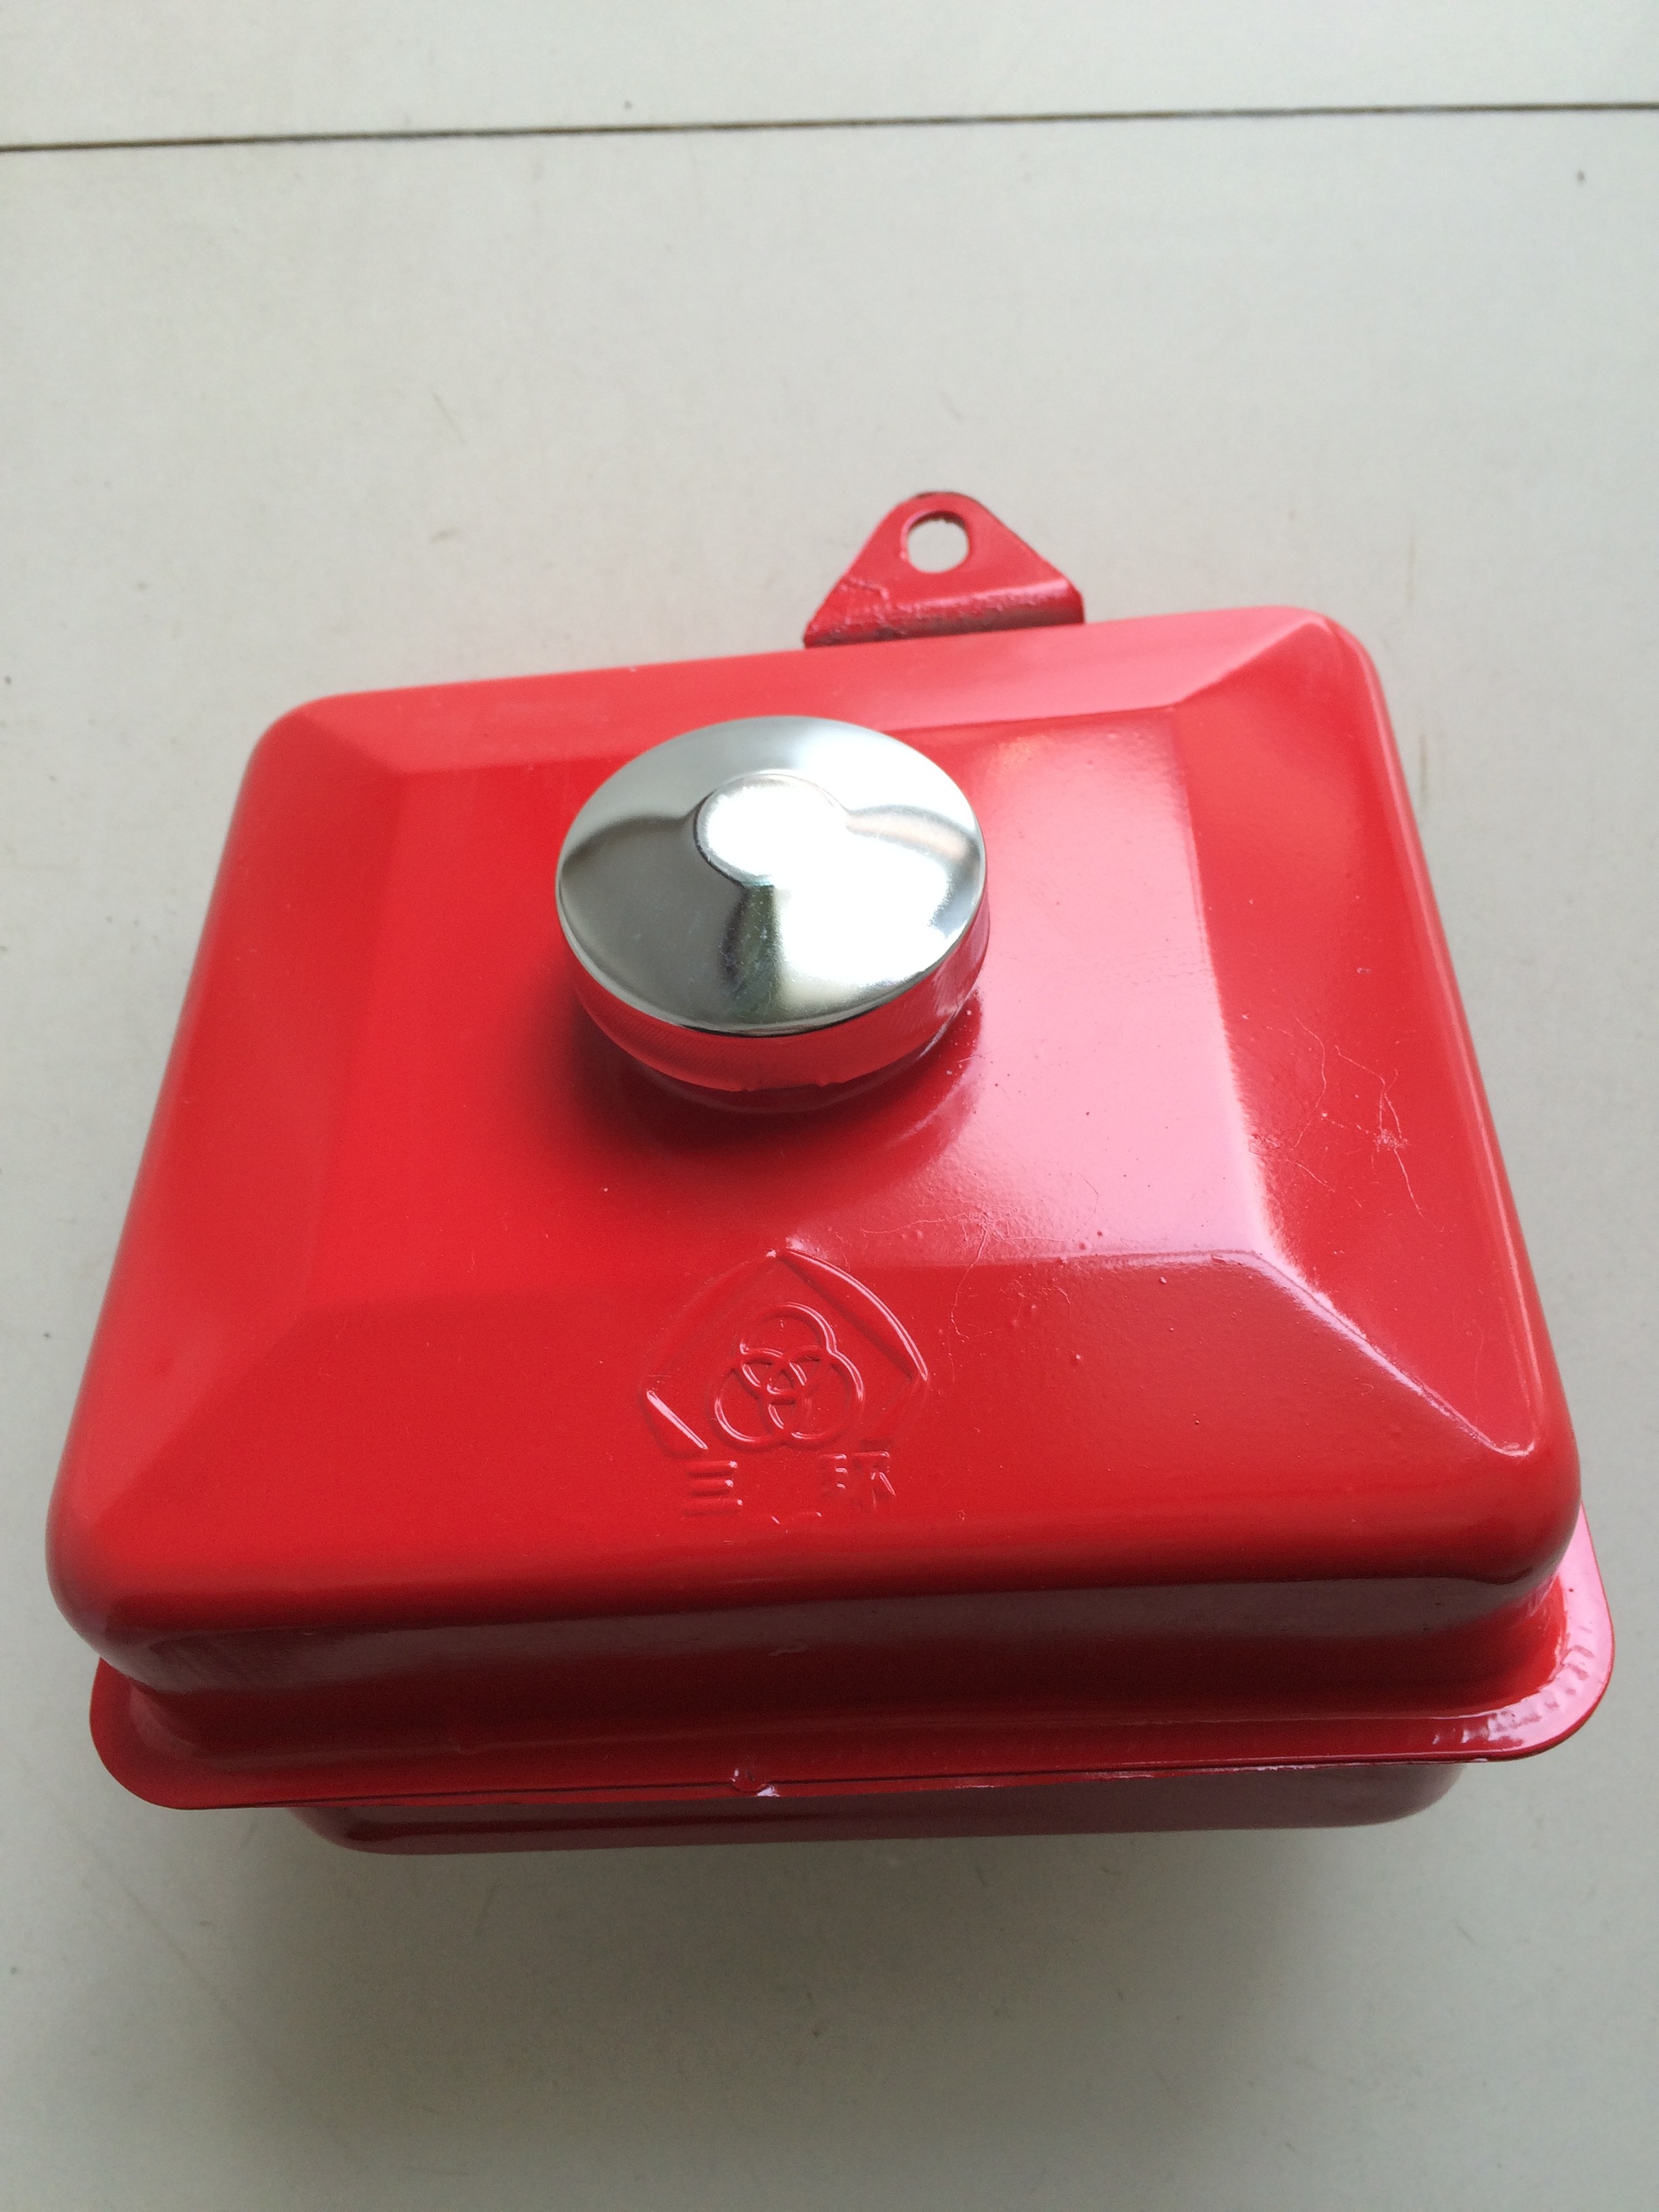 Cheap Diesel engine fuel tank red color with logo for R170 small and big fuel cock hole 50mm and 56mm for sale